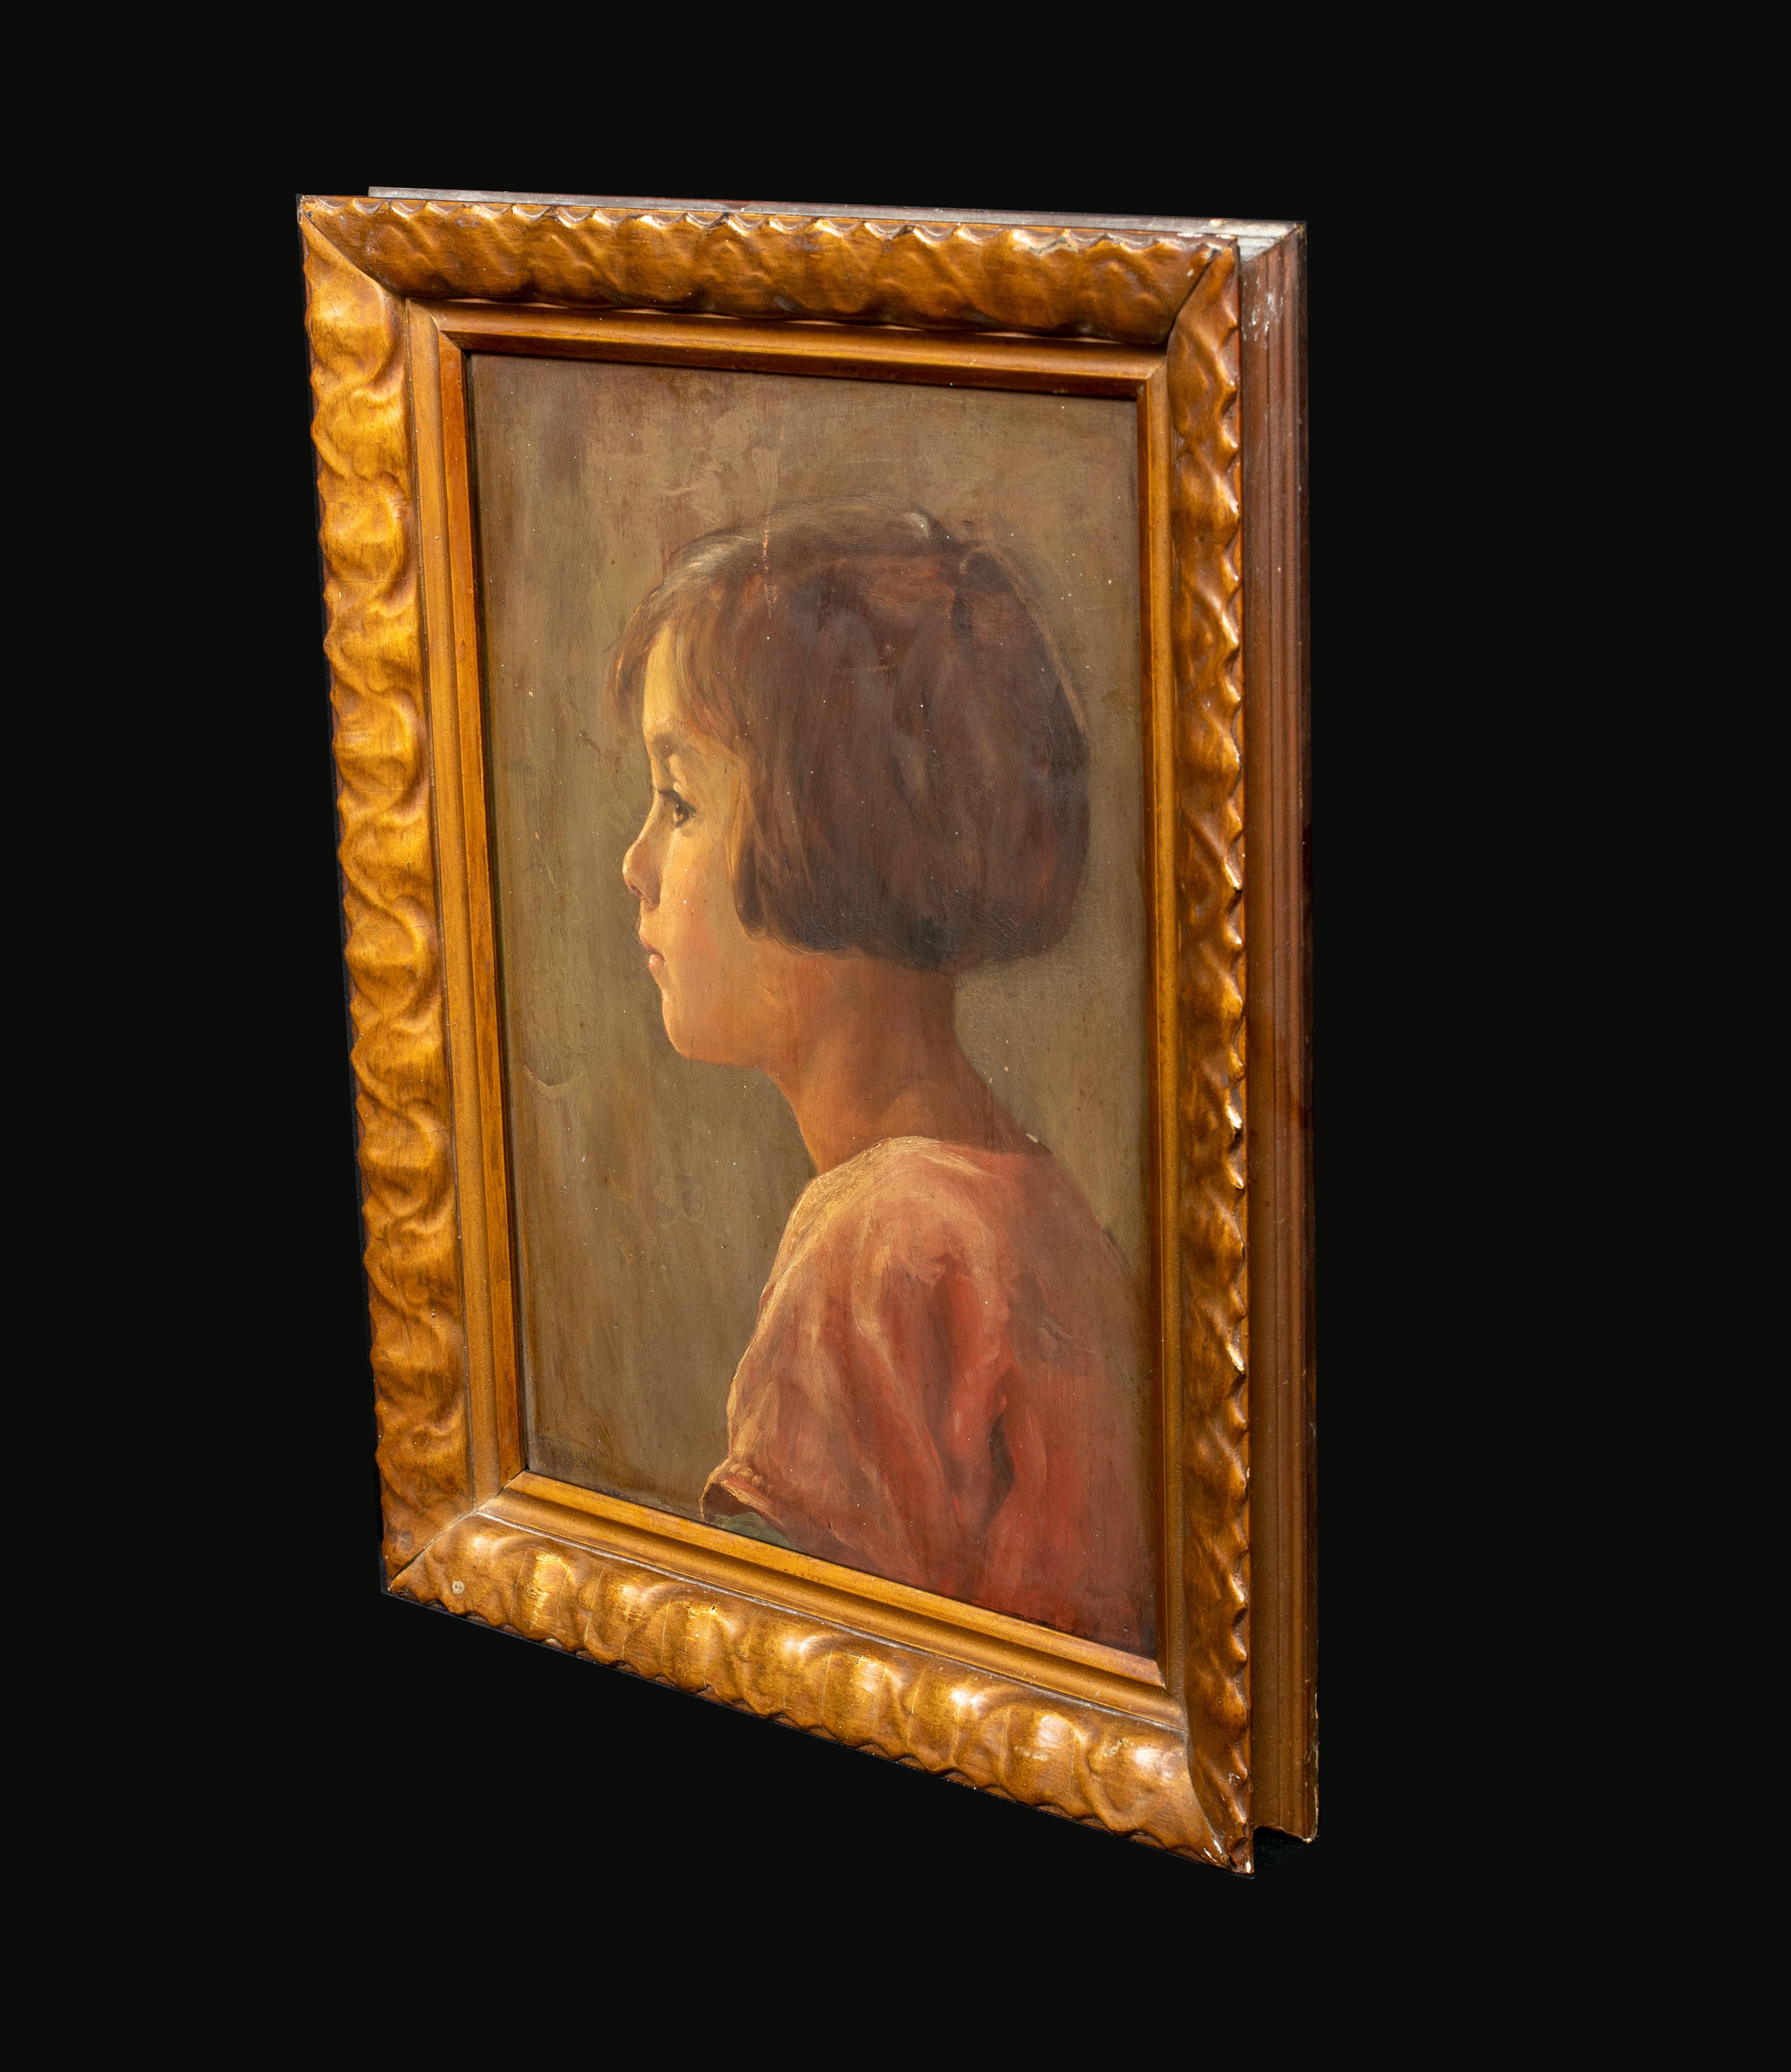 Portrait Of A Girl, dated 1931 - Exhibited At The Royal Academy

by Reginald Edgar James Bush (1869-1956)

1931 English portrait of a young girl, oil on panel by Reginald Edgar James Bush. Excellent quality and condition example of the period and